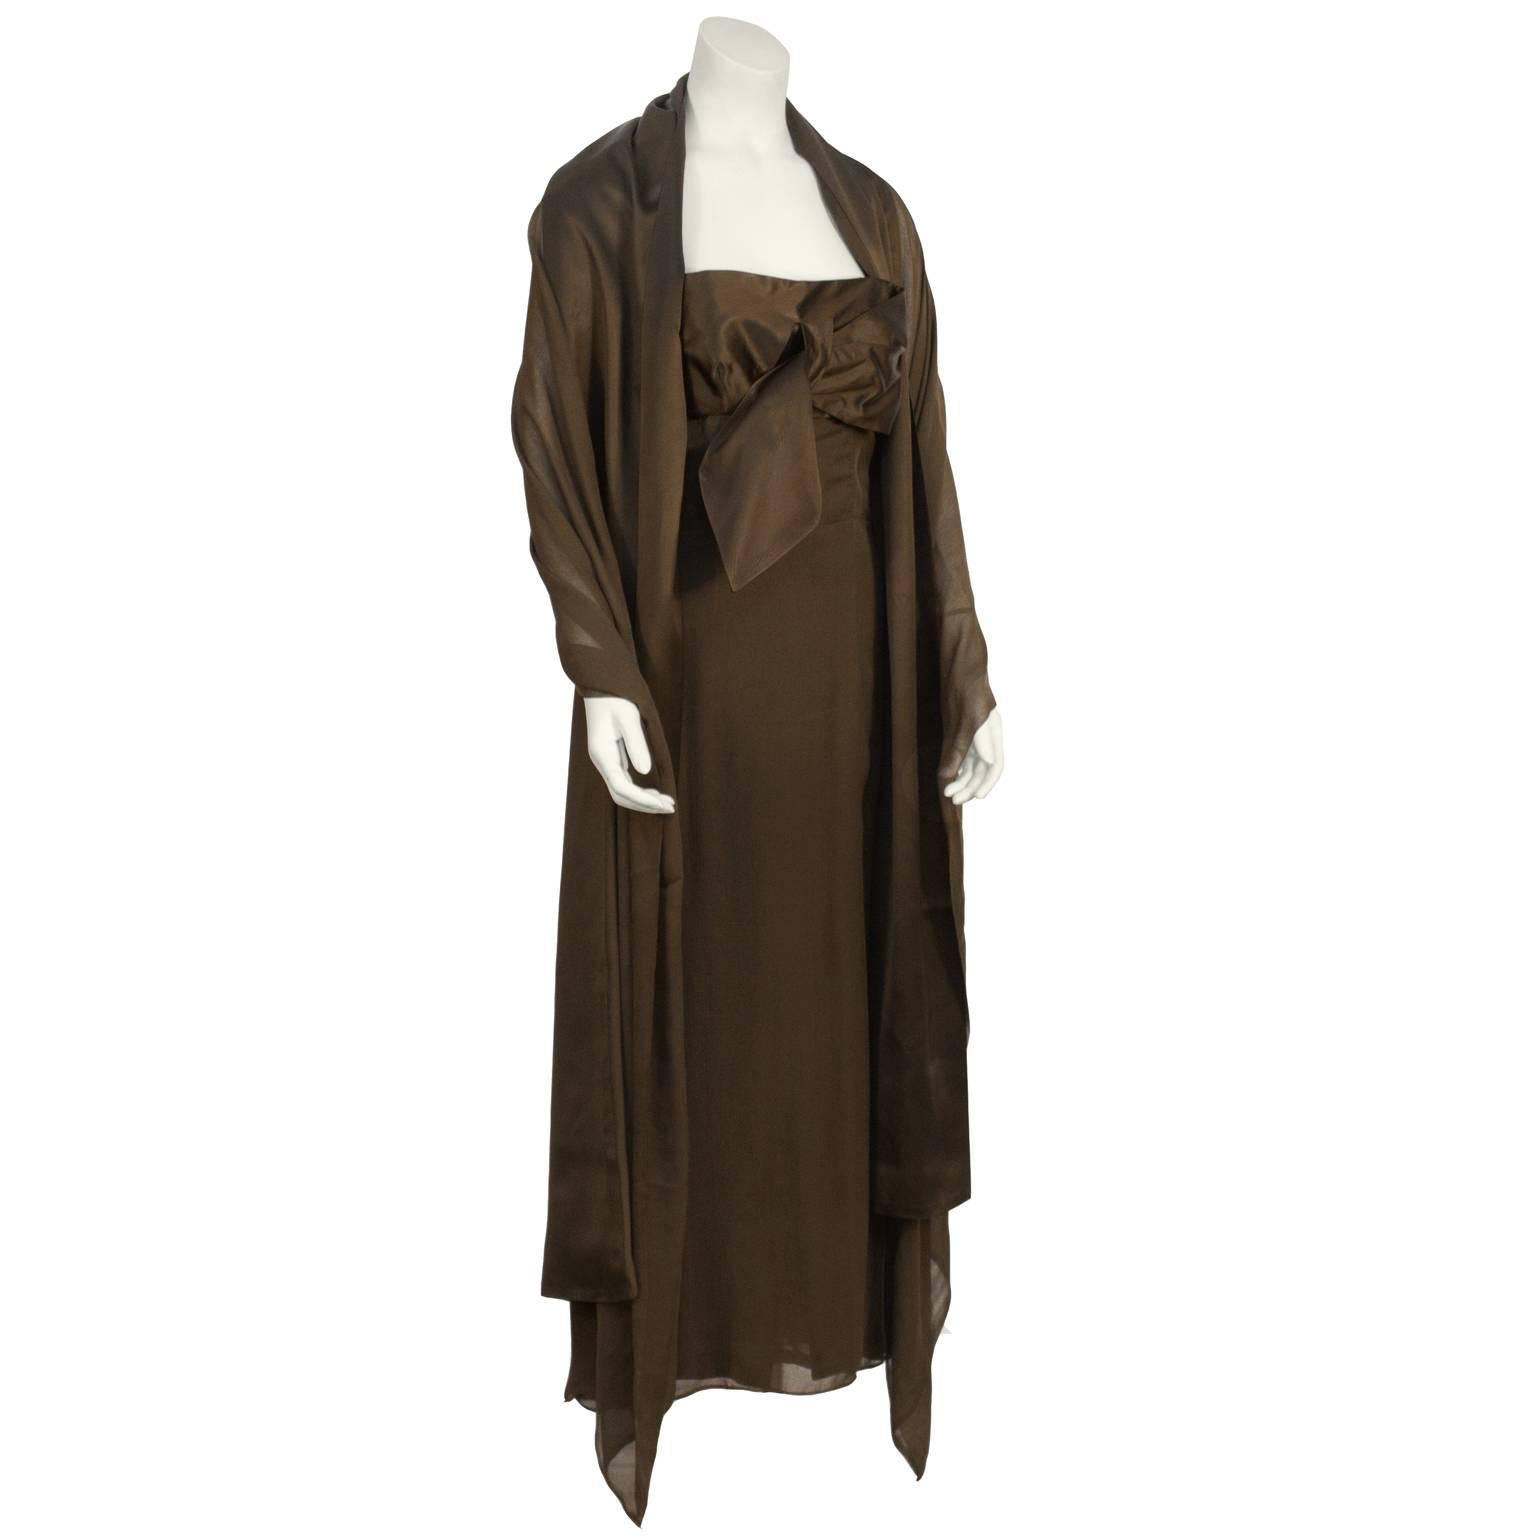 Lanvin brown evening gown from the 1950's. The empire waist dress features spaghetti straps and a fitted satin bodice with an oversized bow on the front. Zipper up the side. Excellent vintage condition. Matching satin and chiffon wide shawl. Dress